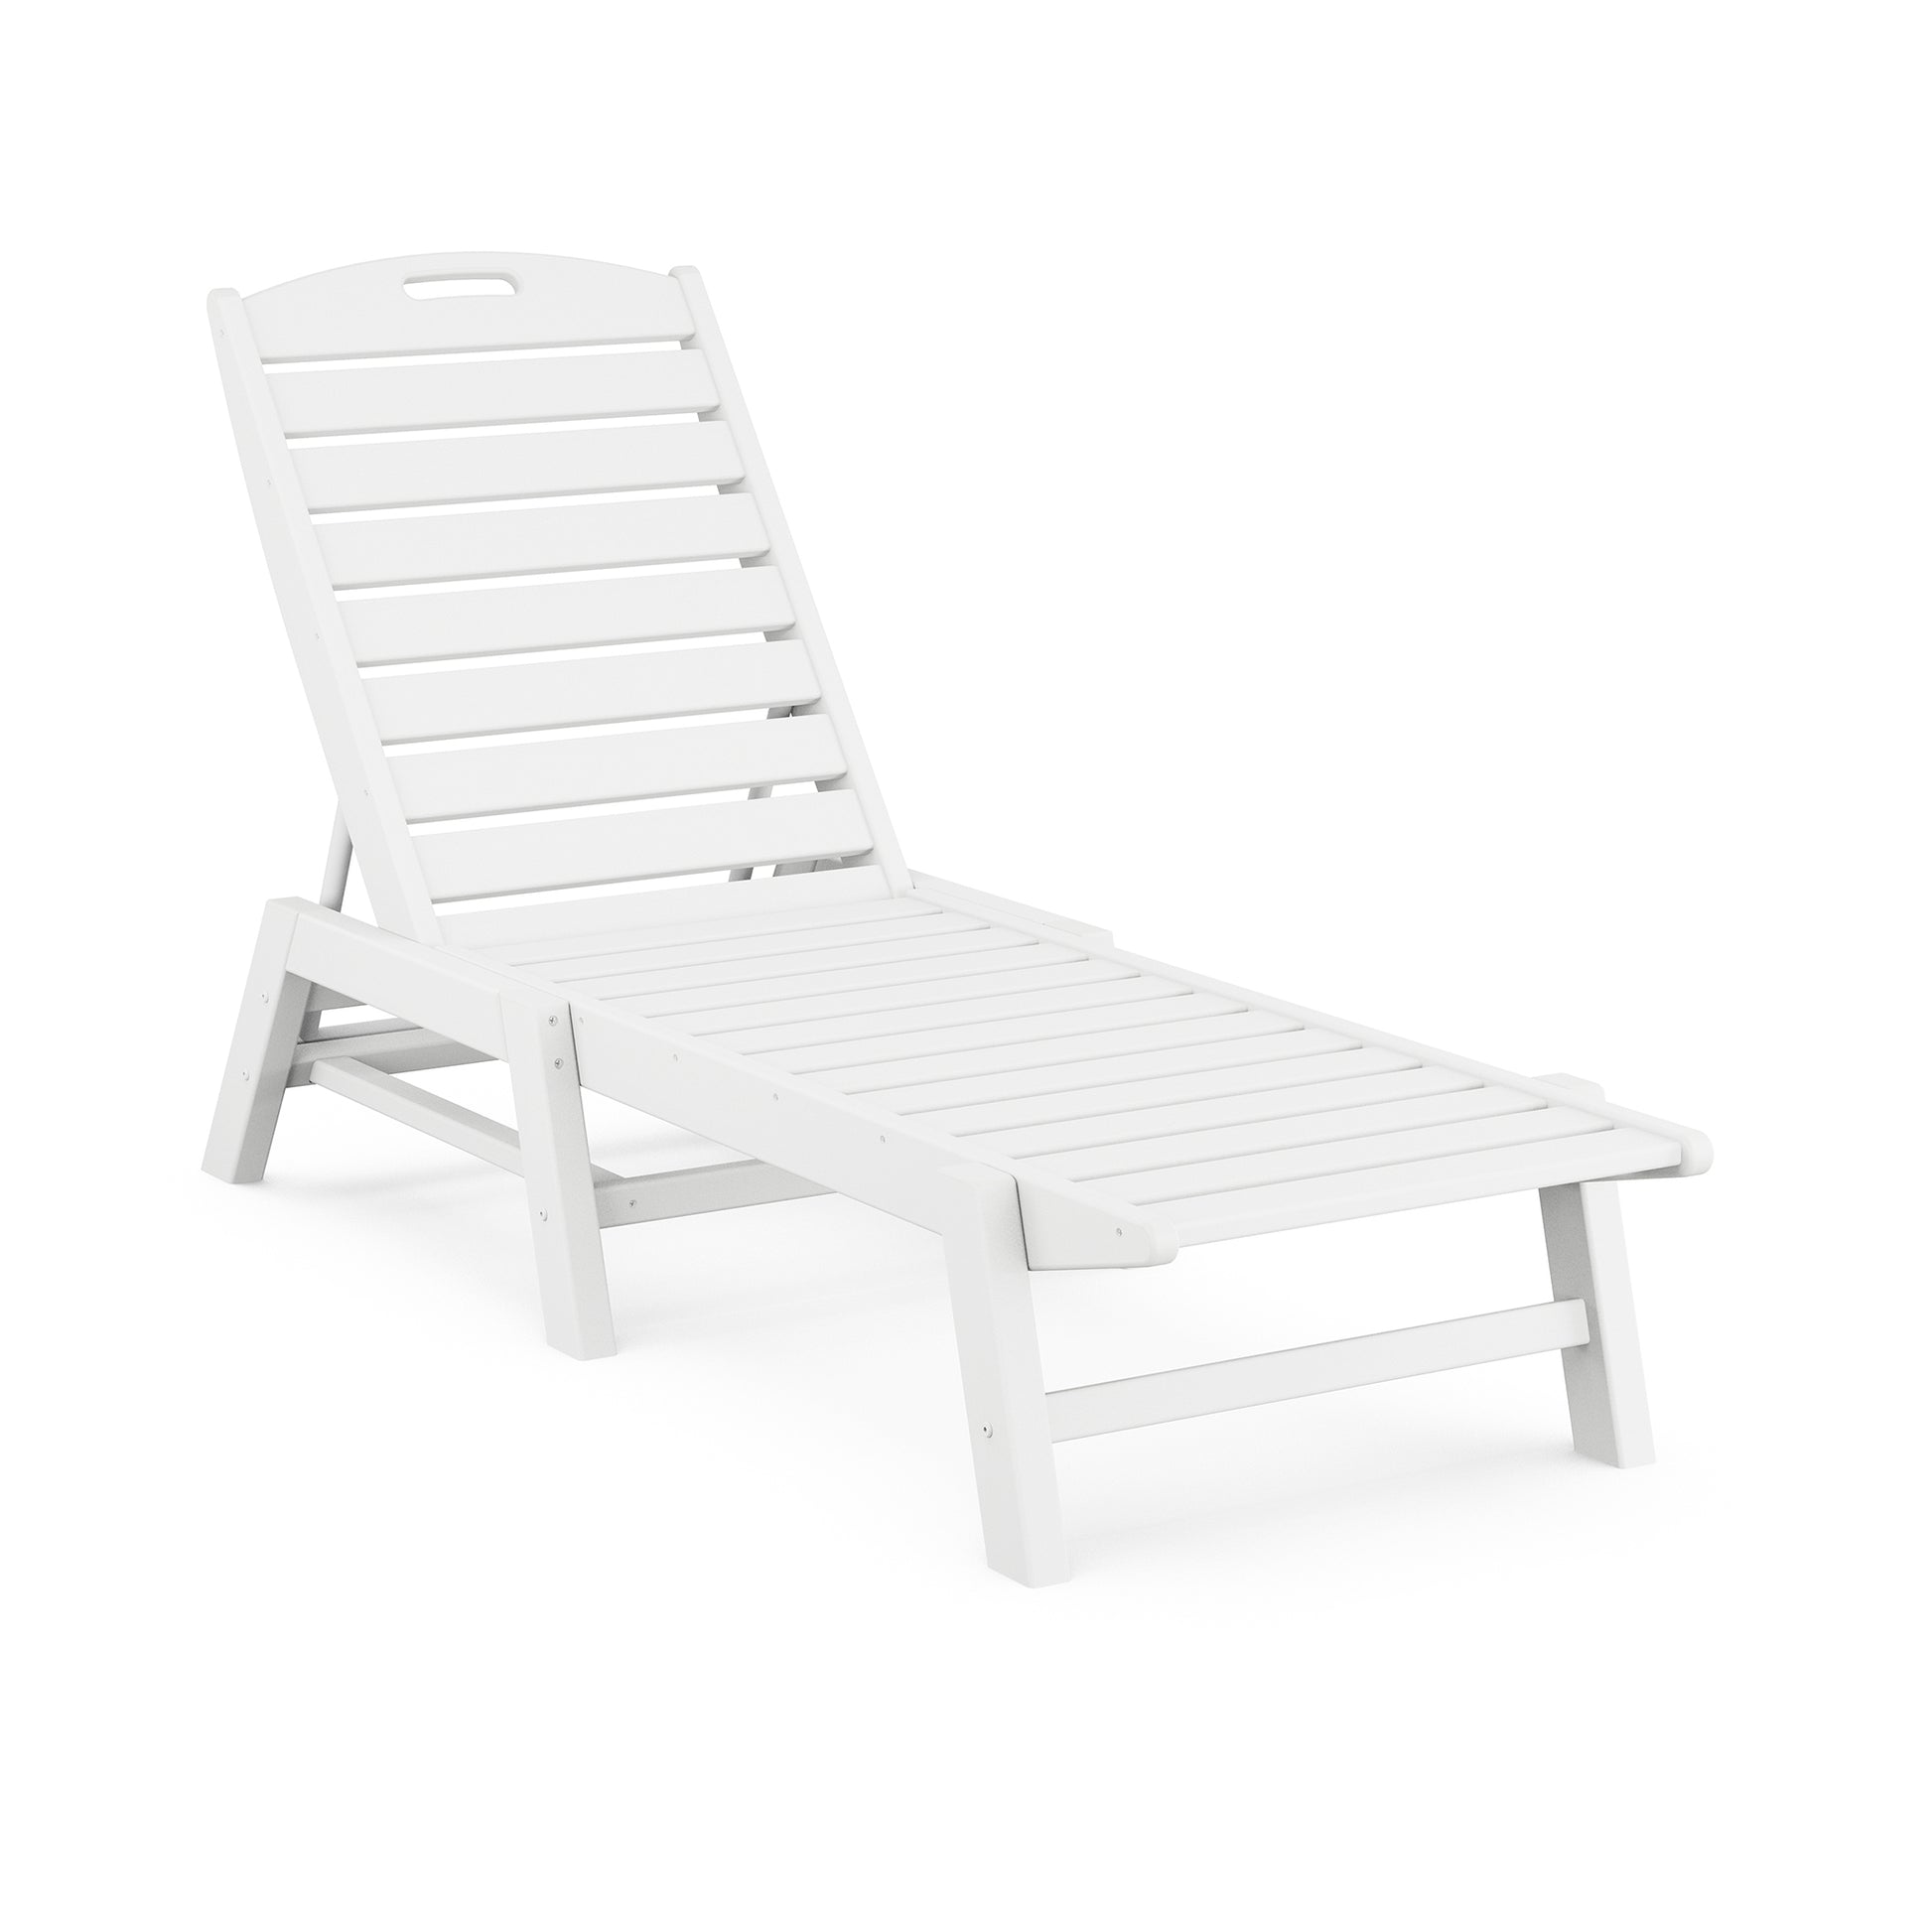 POLYWOOD® Nautical Armless Chaise Lounge isolated on a white background.